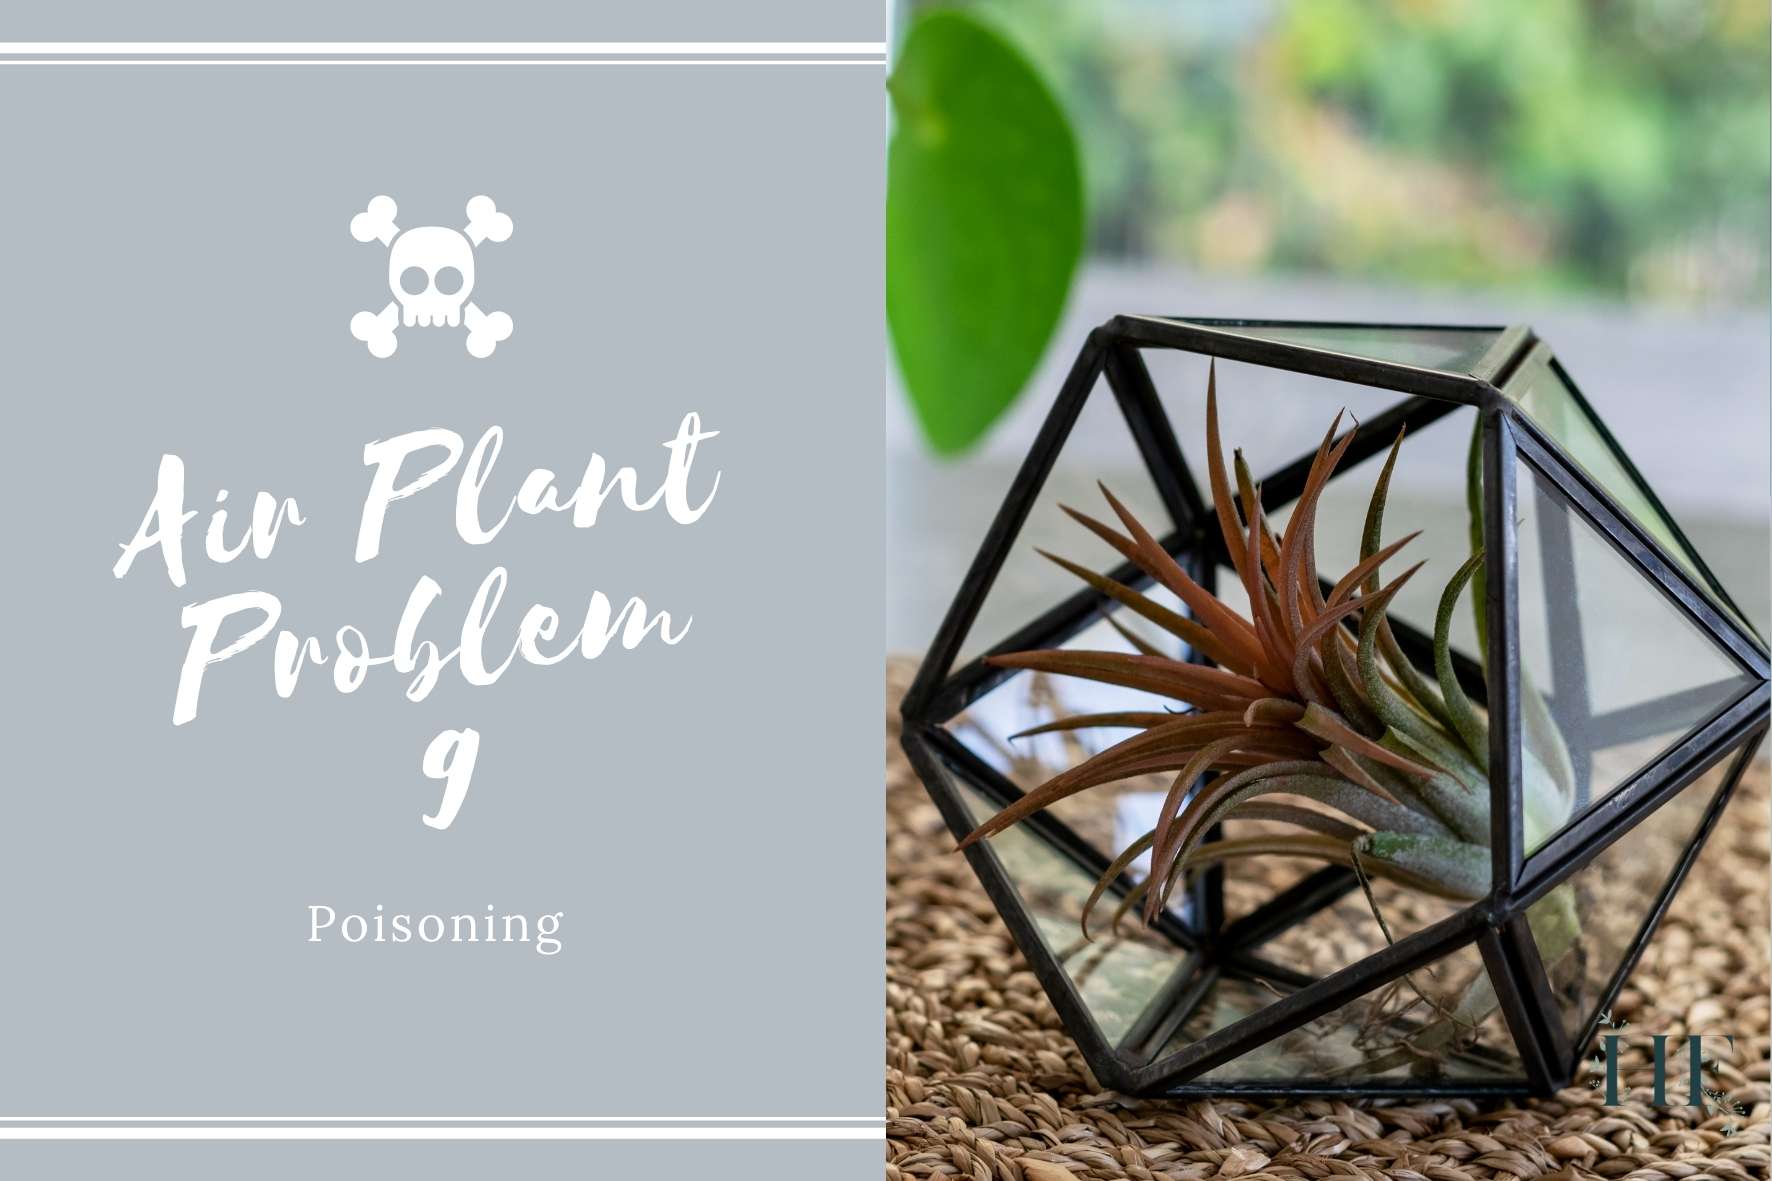 air-plant-problems-9-poisoning